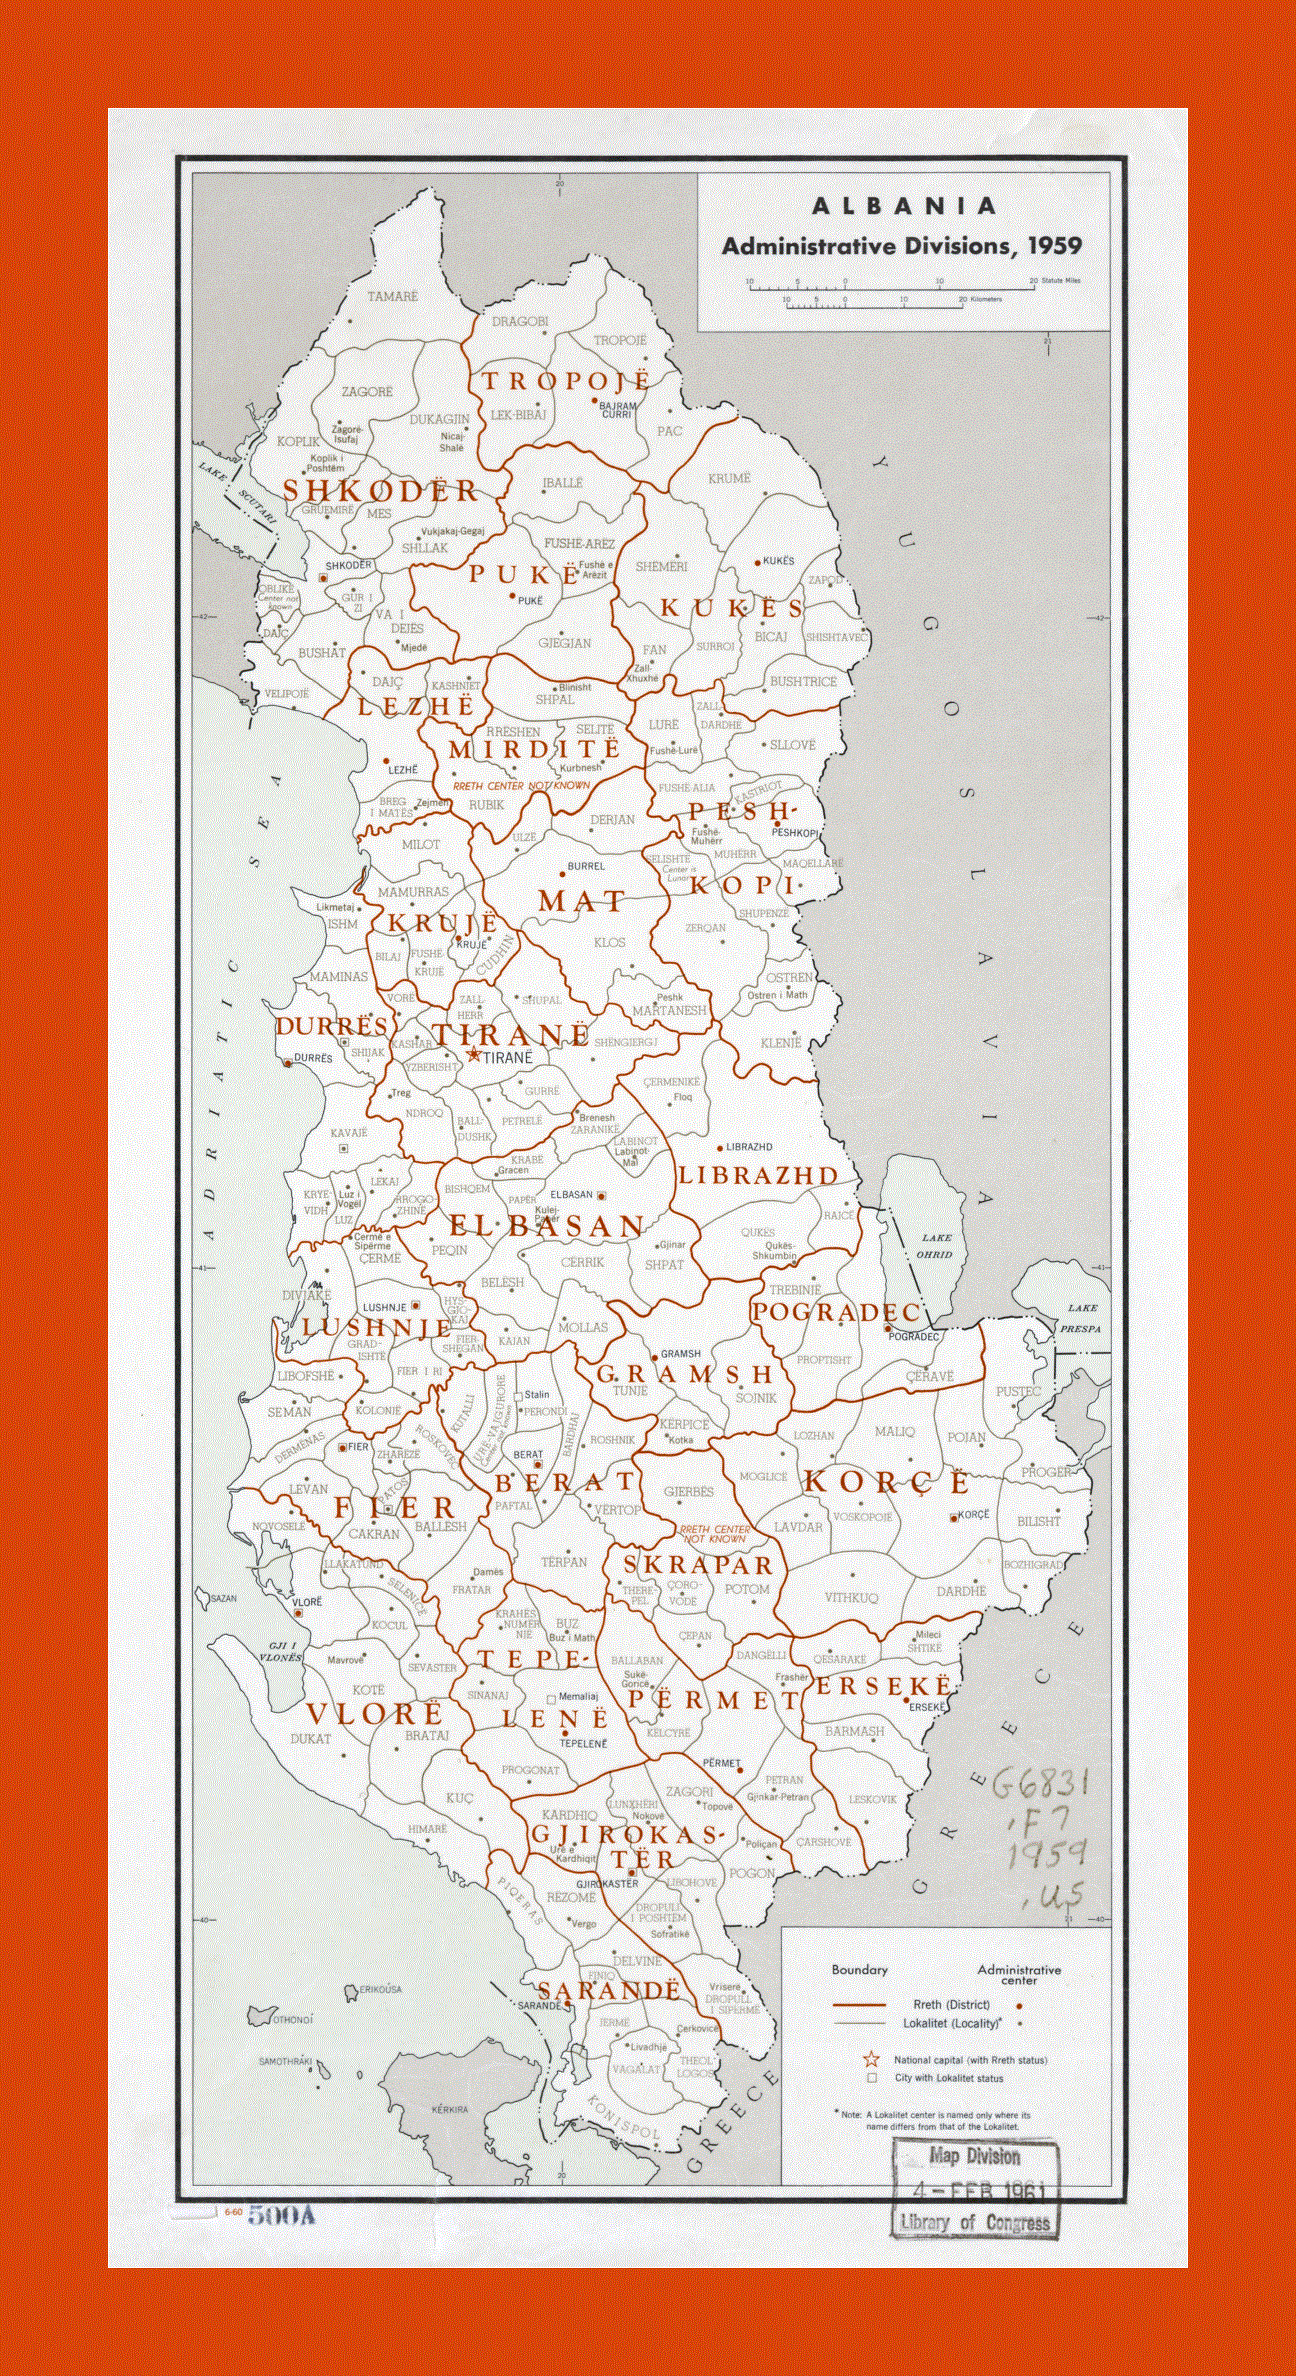 Administrative divisions map of Albania - 1959